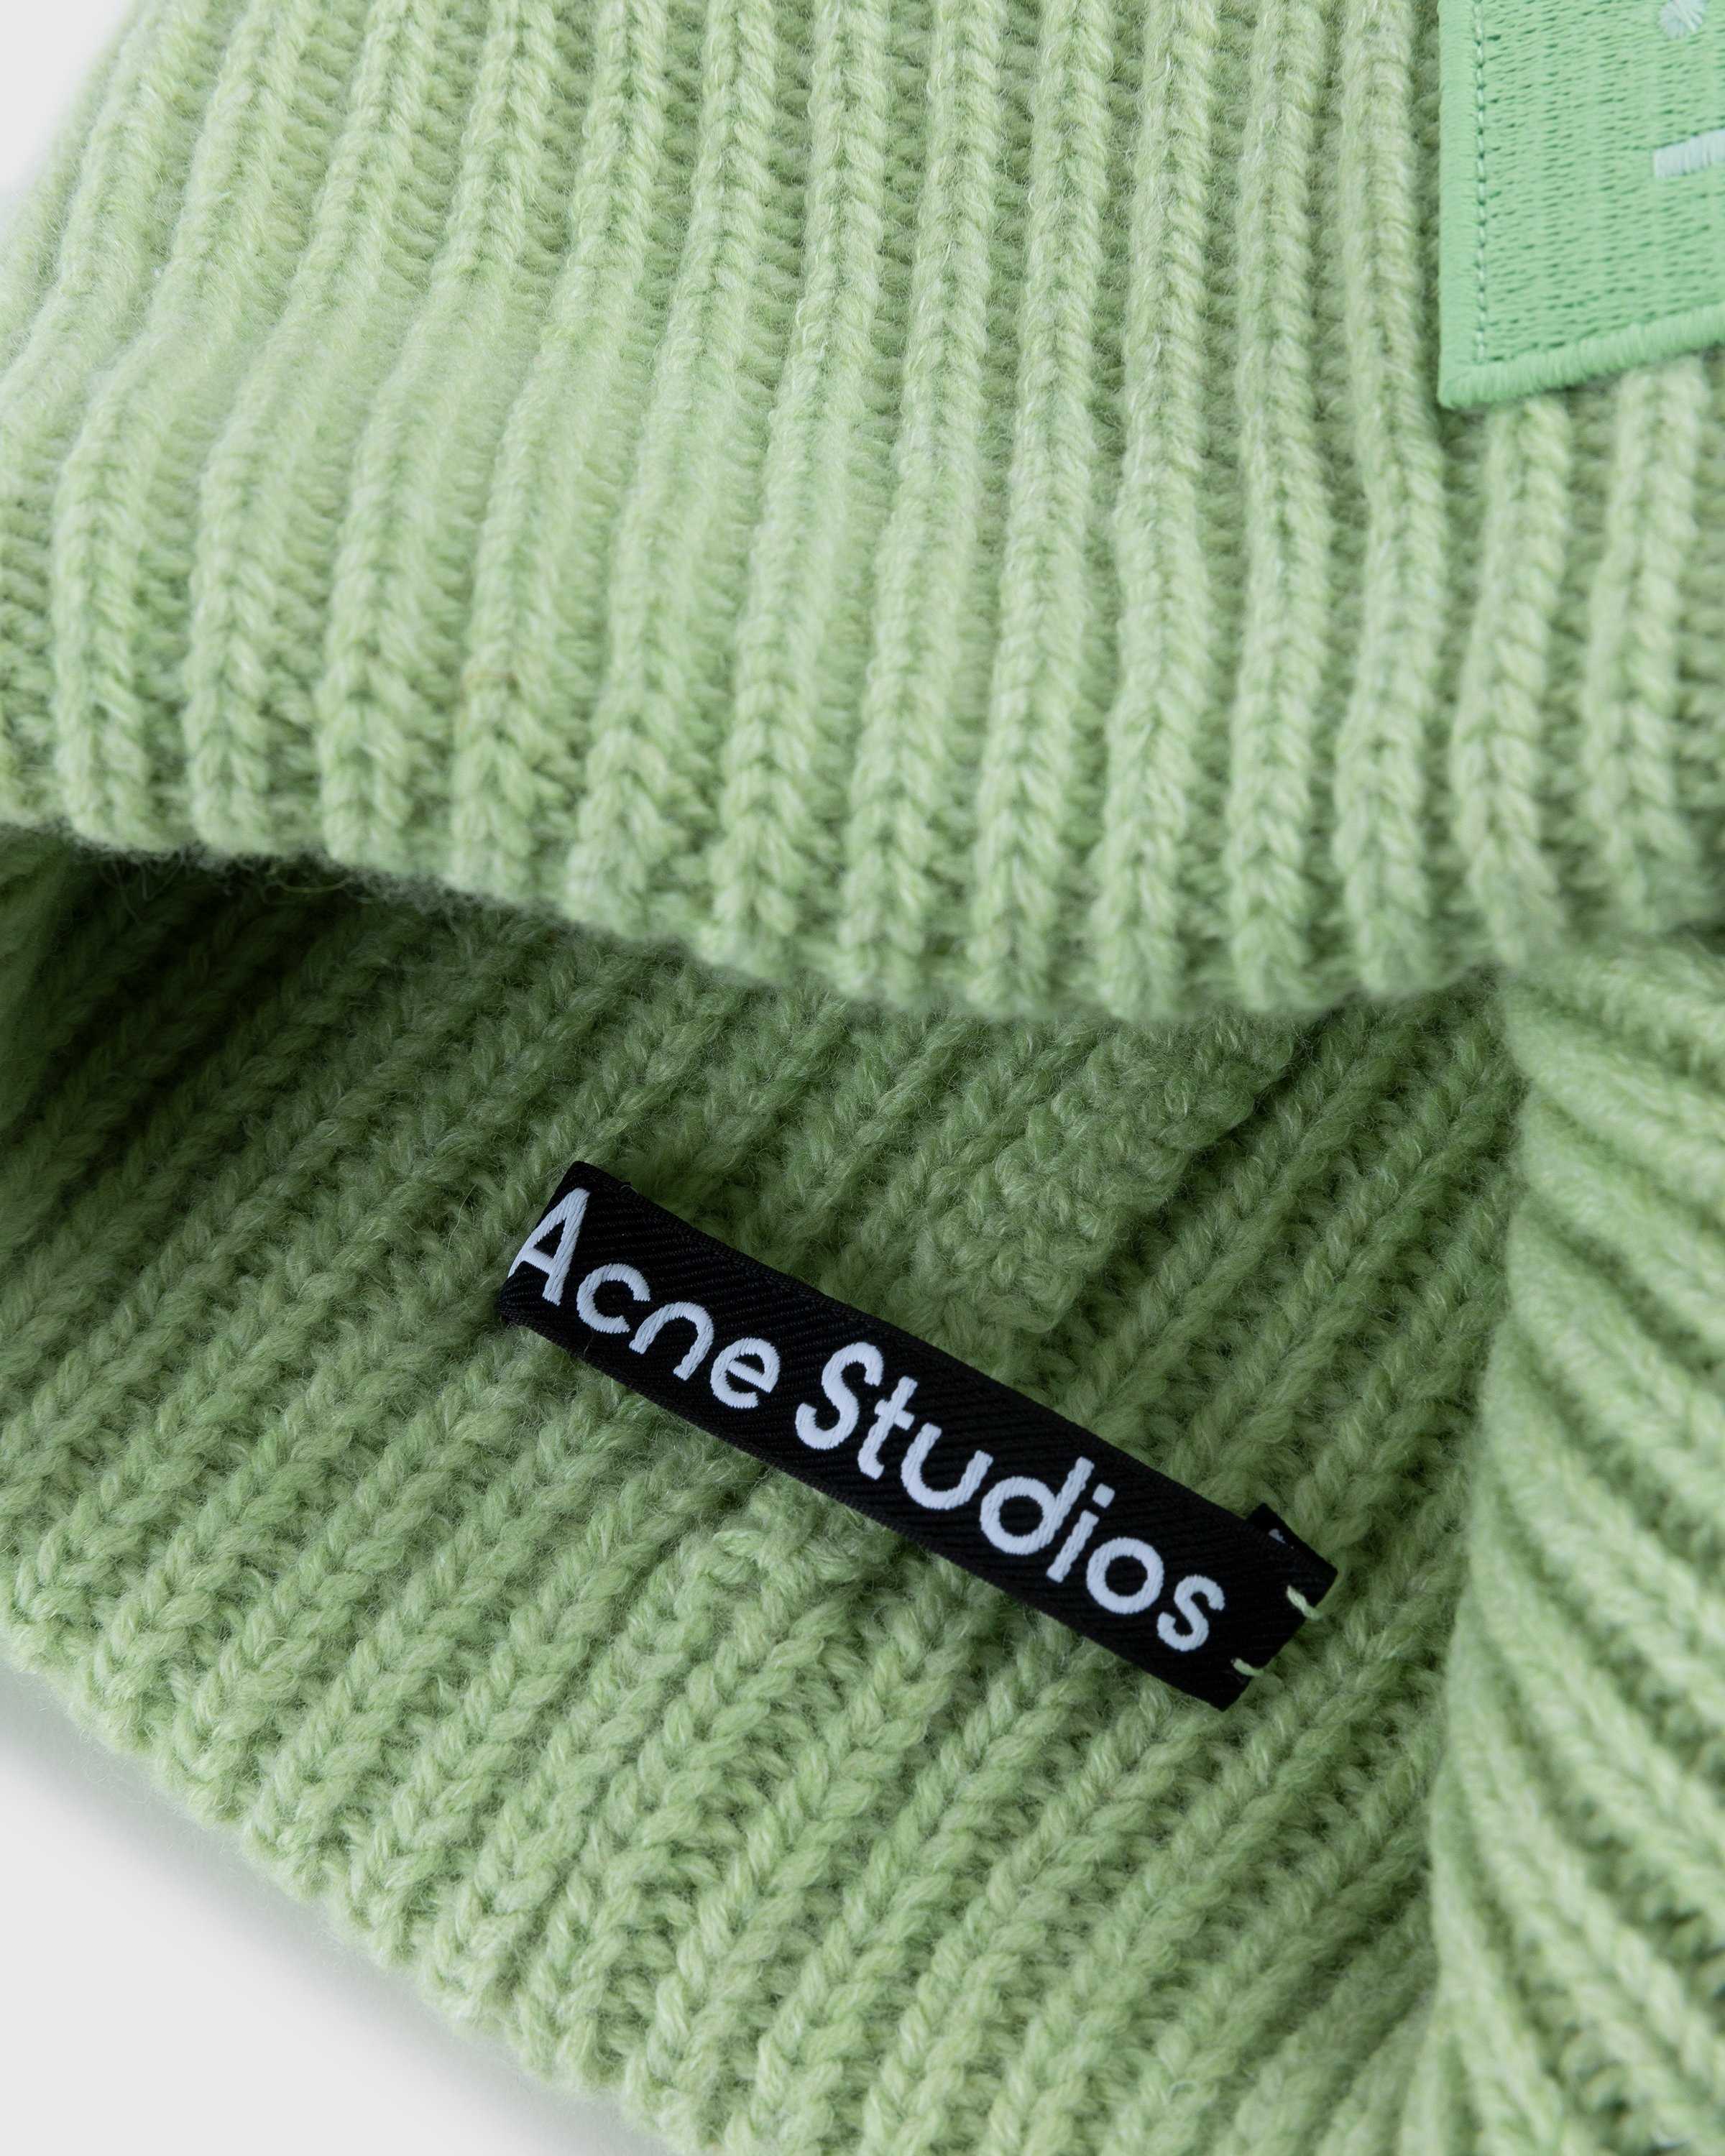 Acne Studios – Knit Face Patch Beanie Pale Green - Beanies - Green - Image 4